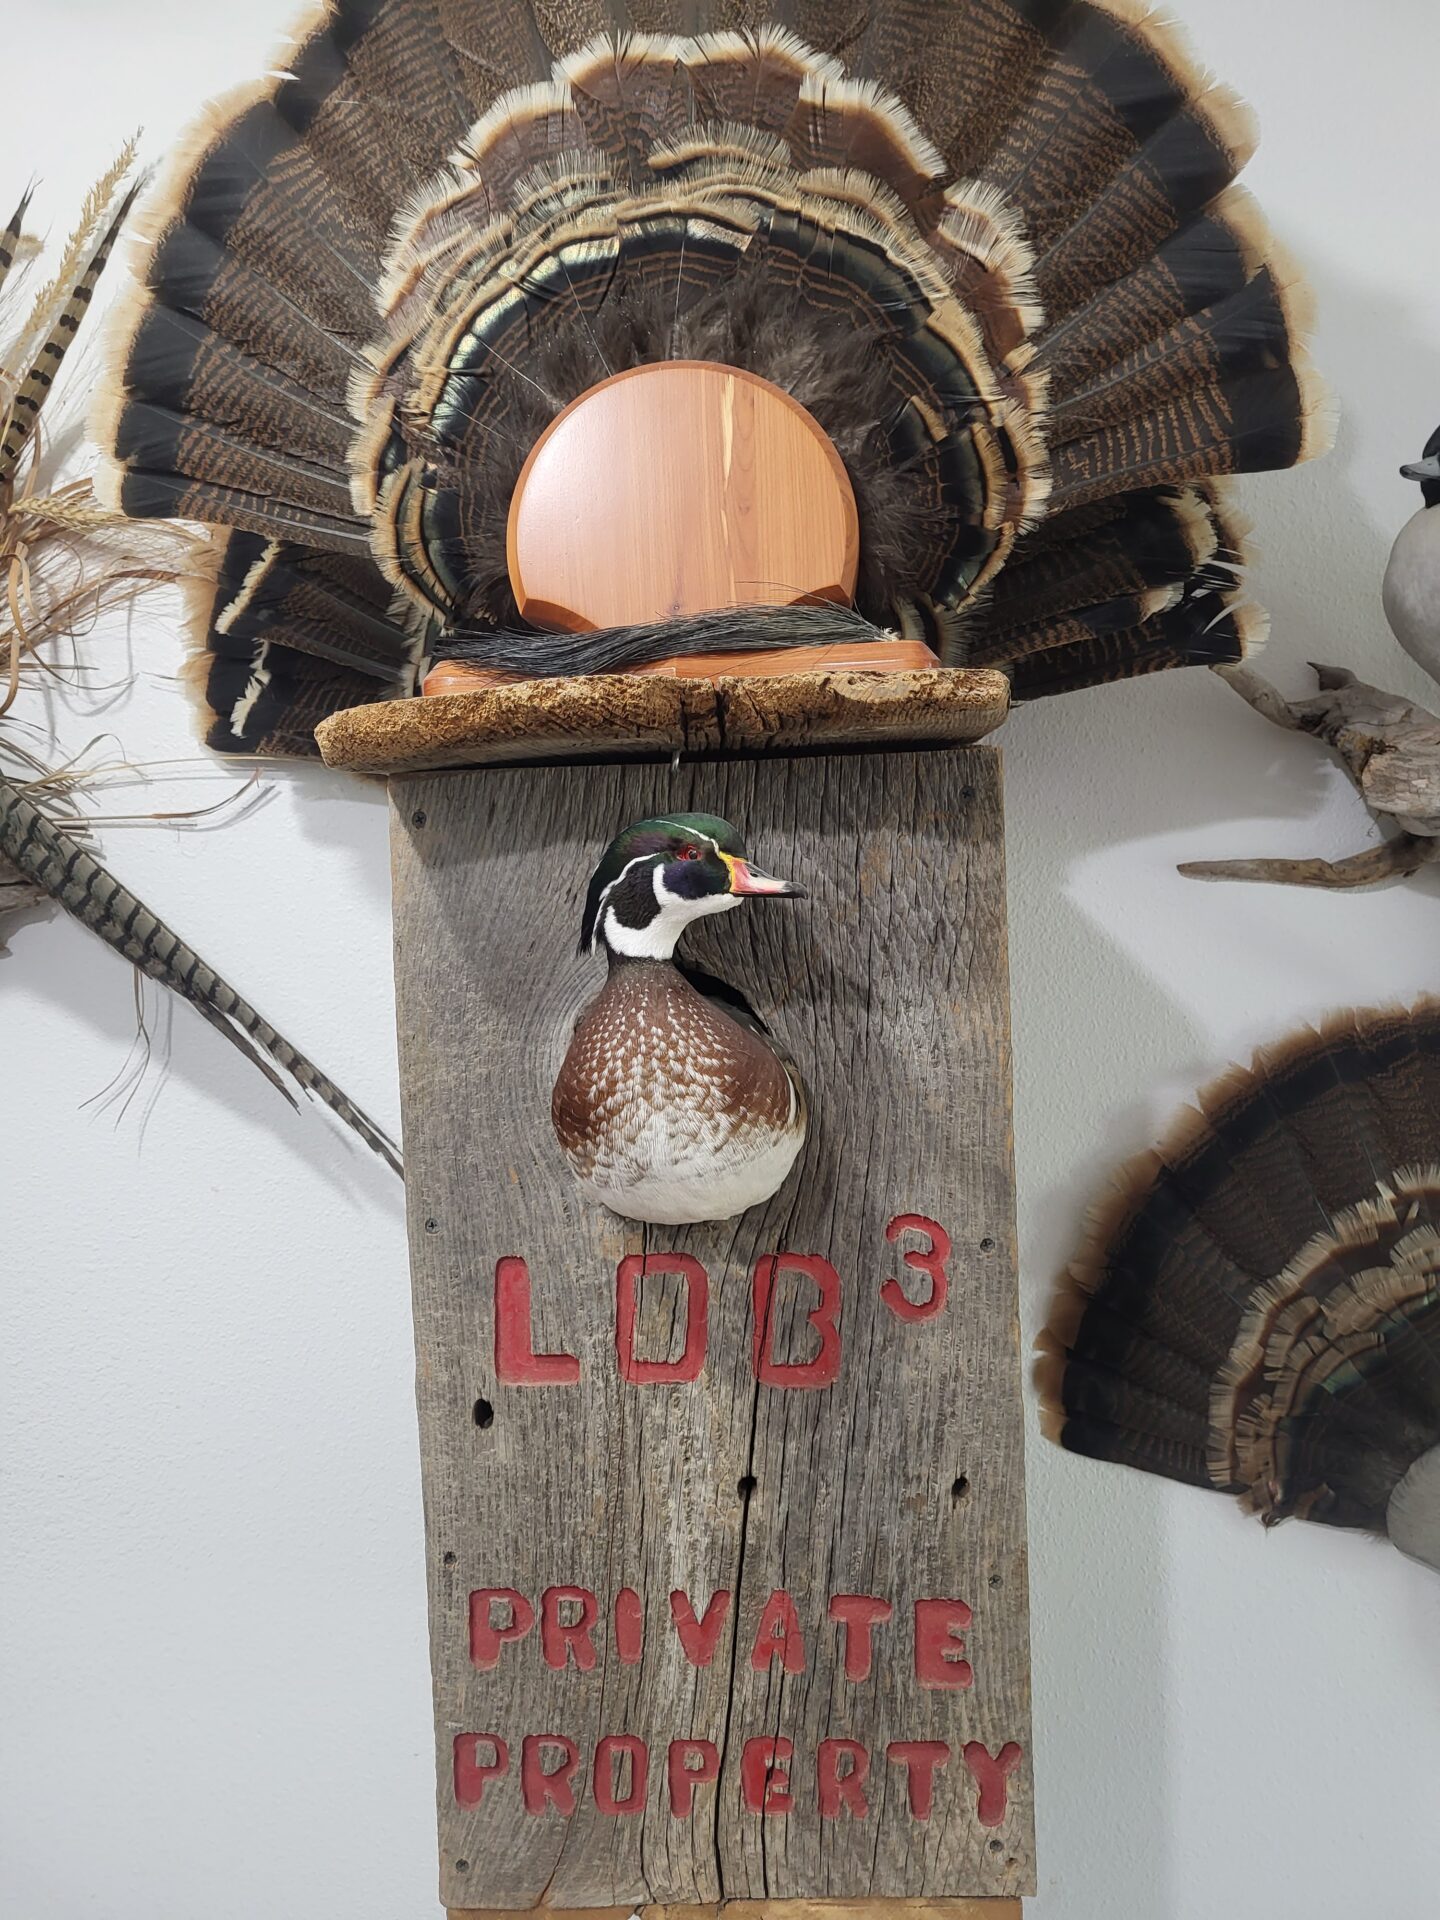 The waterfowl taxidermy can adorn your doors and walls